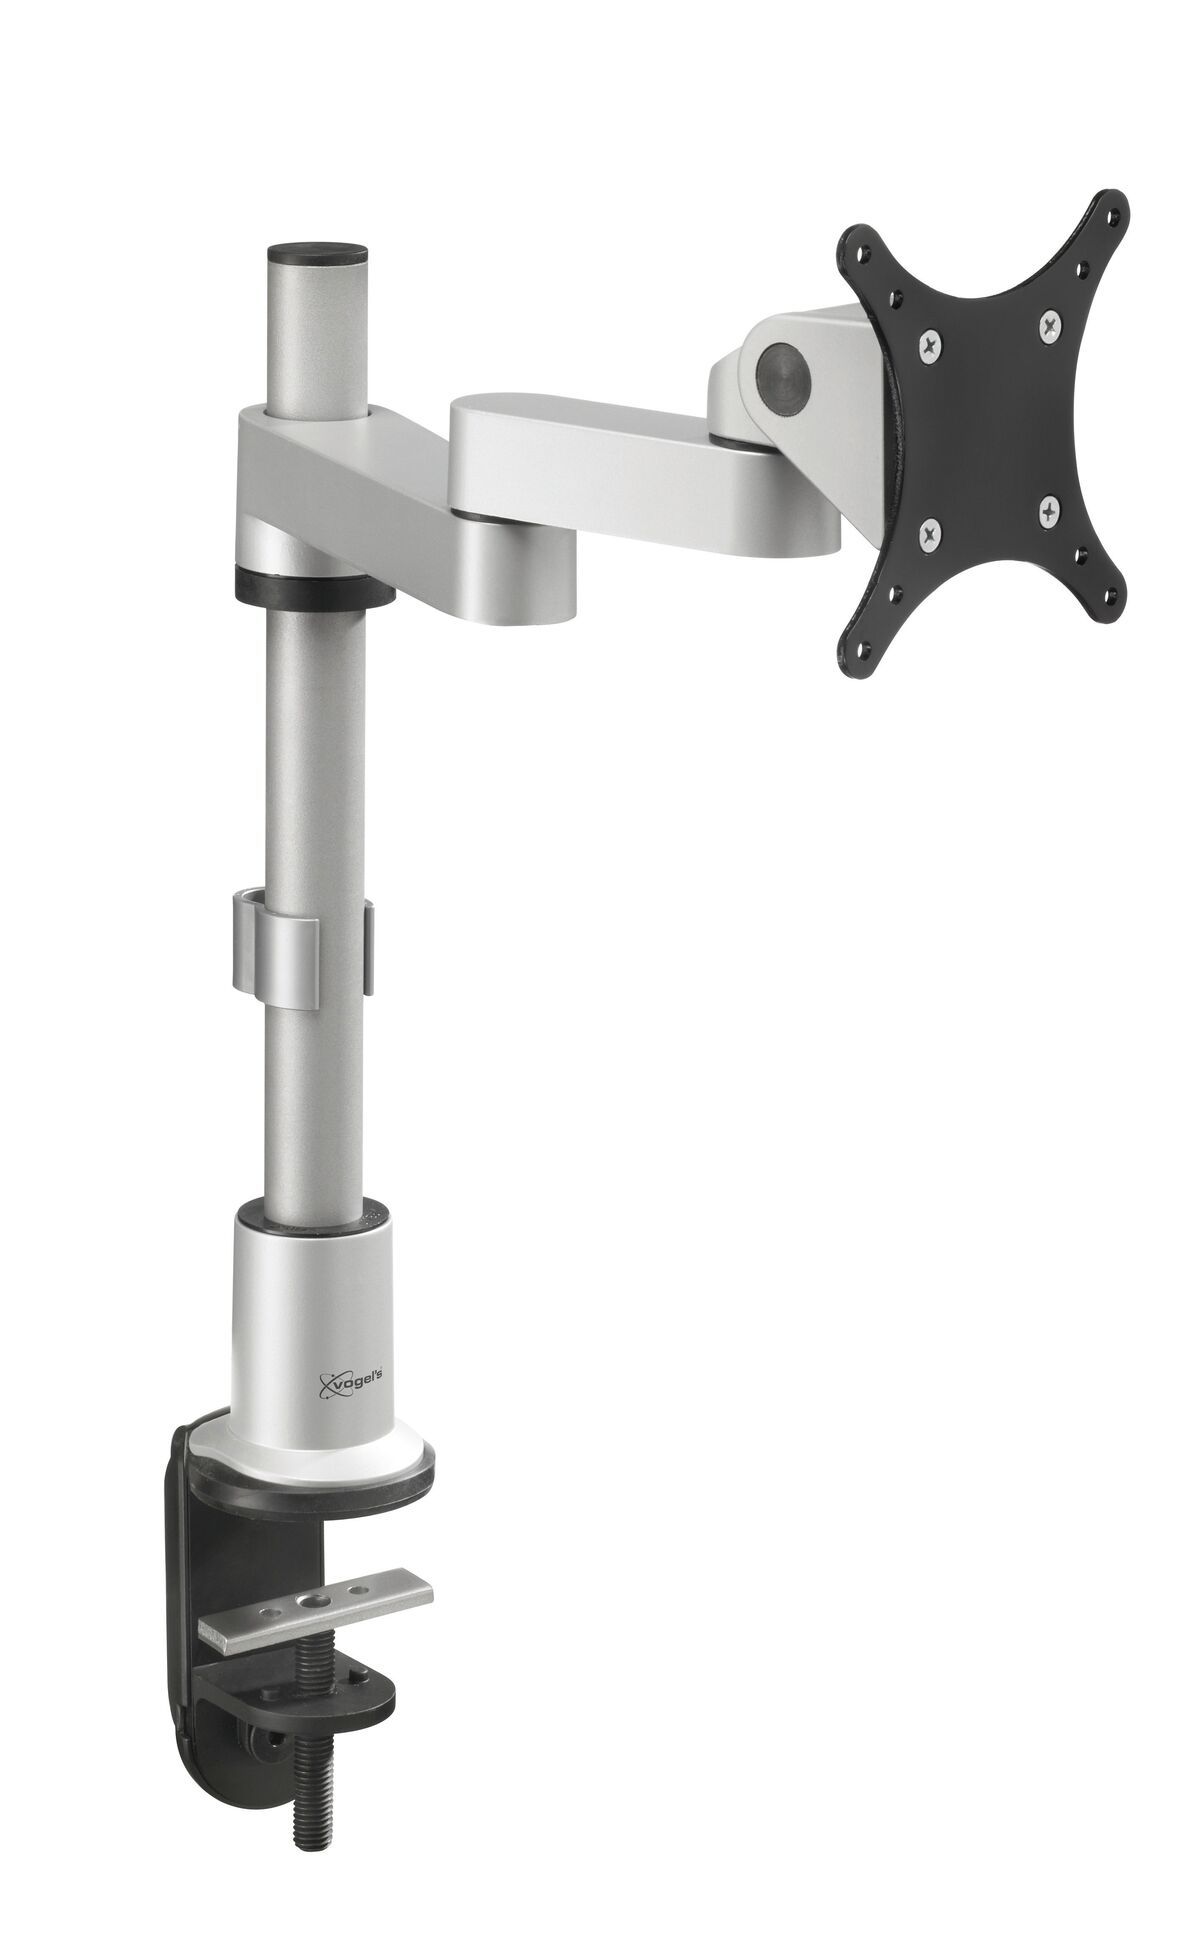 Vogel's PFD 8523 Monitor Arm static (silver) - For monitors up to 13 kg - Ideally suited for Gaming and (Home) Office - Product